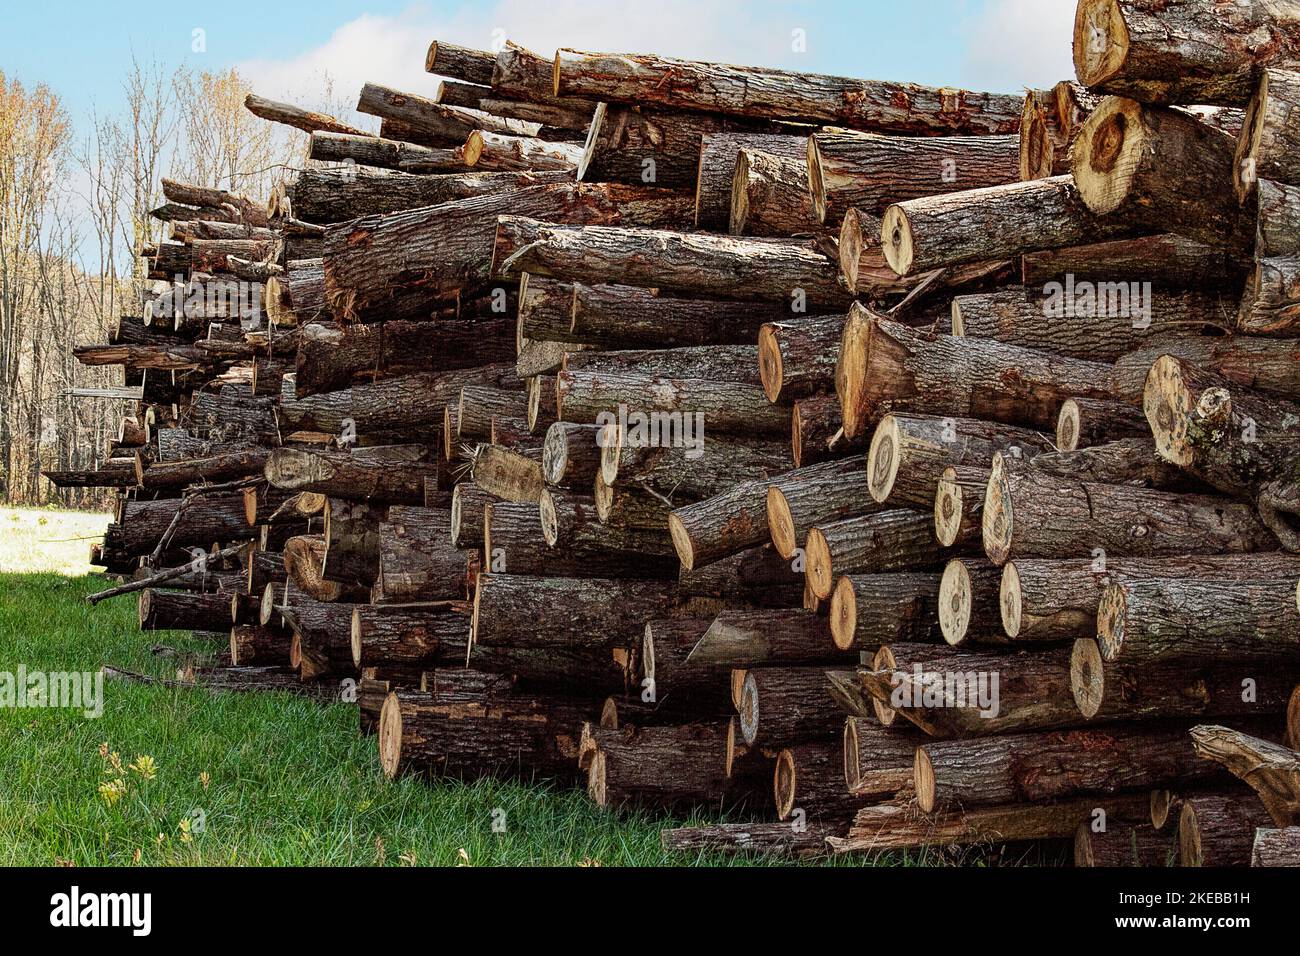 Closeup of logs stacked high in countryside. Stock Photo